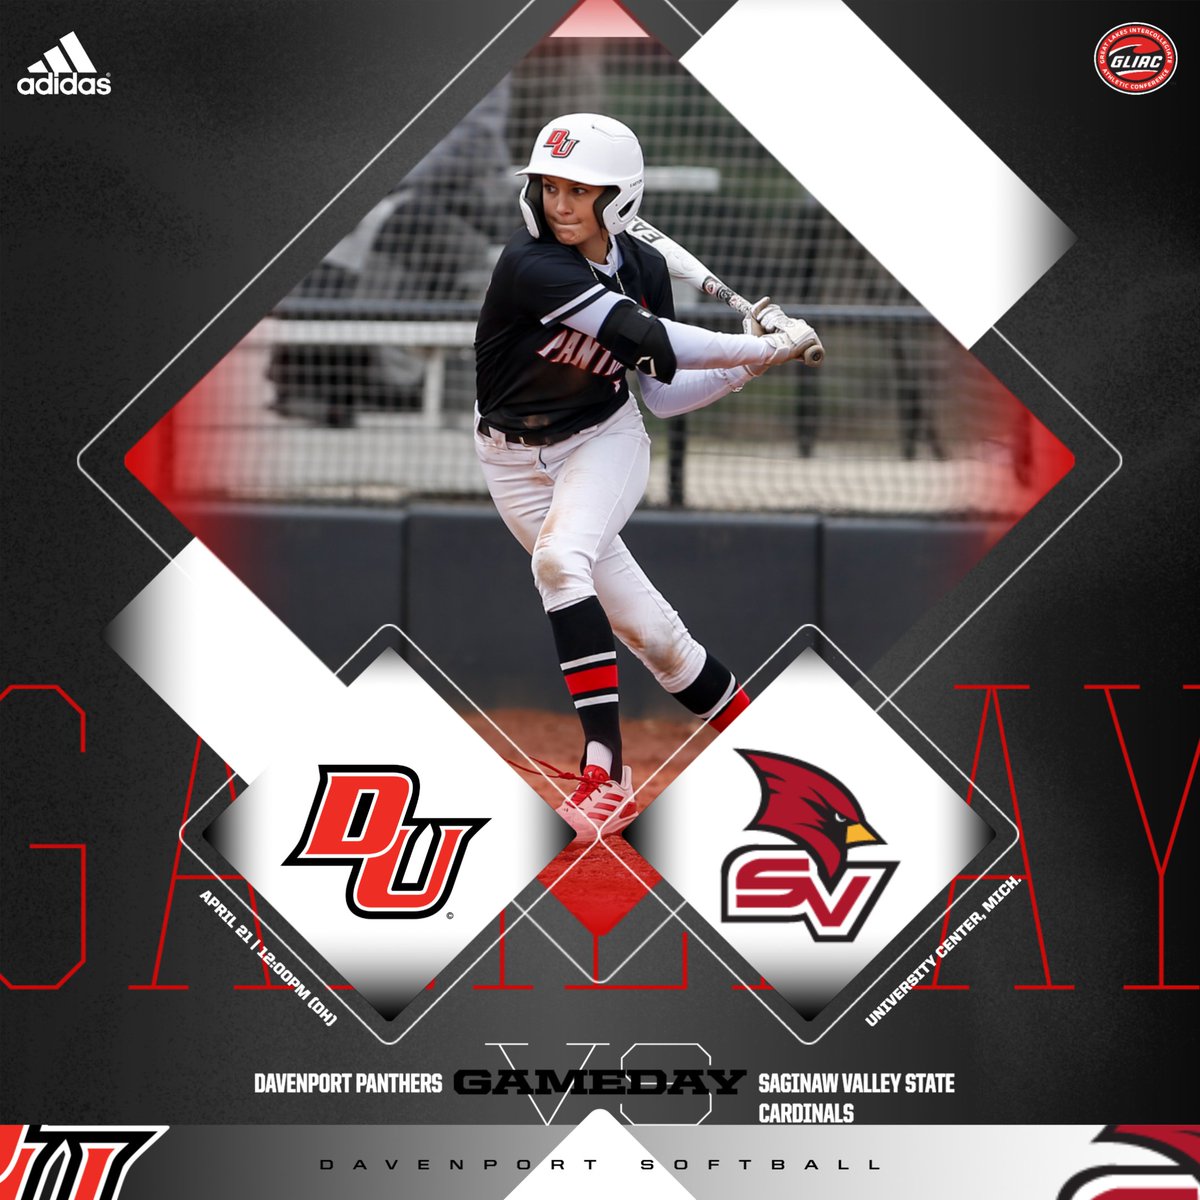 Softball Gameday Capping off the weekend with a road trip to University Center, Mich. for a matchup with SVSU. 📺: flosoftball.com/events/1196326… 📊 (G1): svsucardinals.com/sports/sball/2… 📊 (G2): svsucardinals.com/sports/sball/2… #DUWork @DU_SBALL